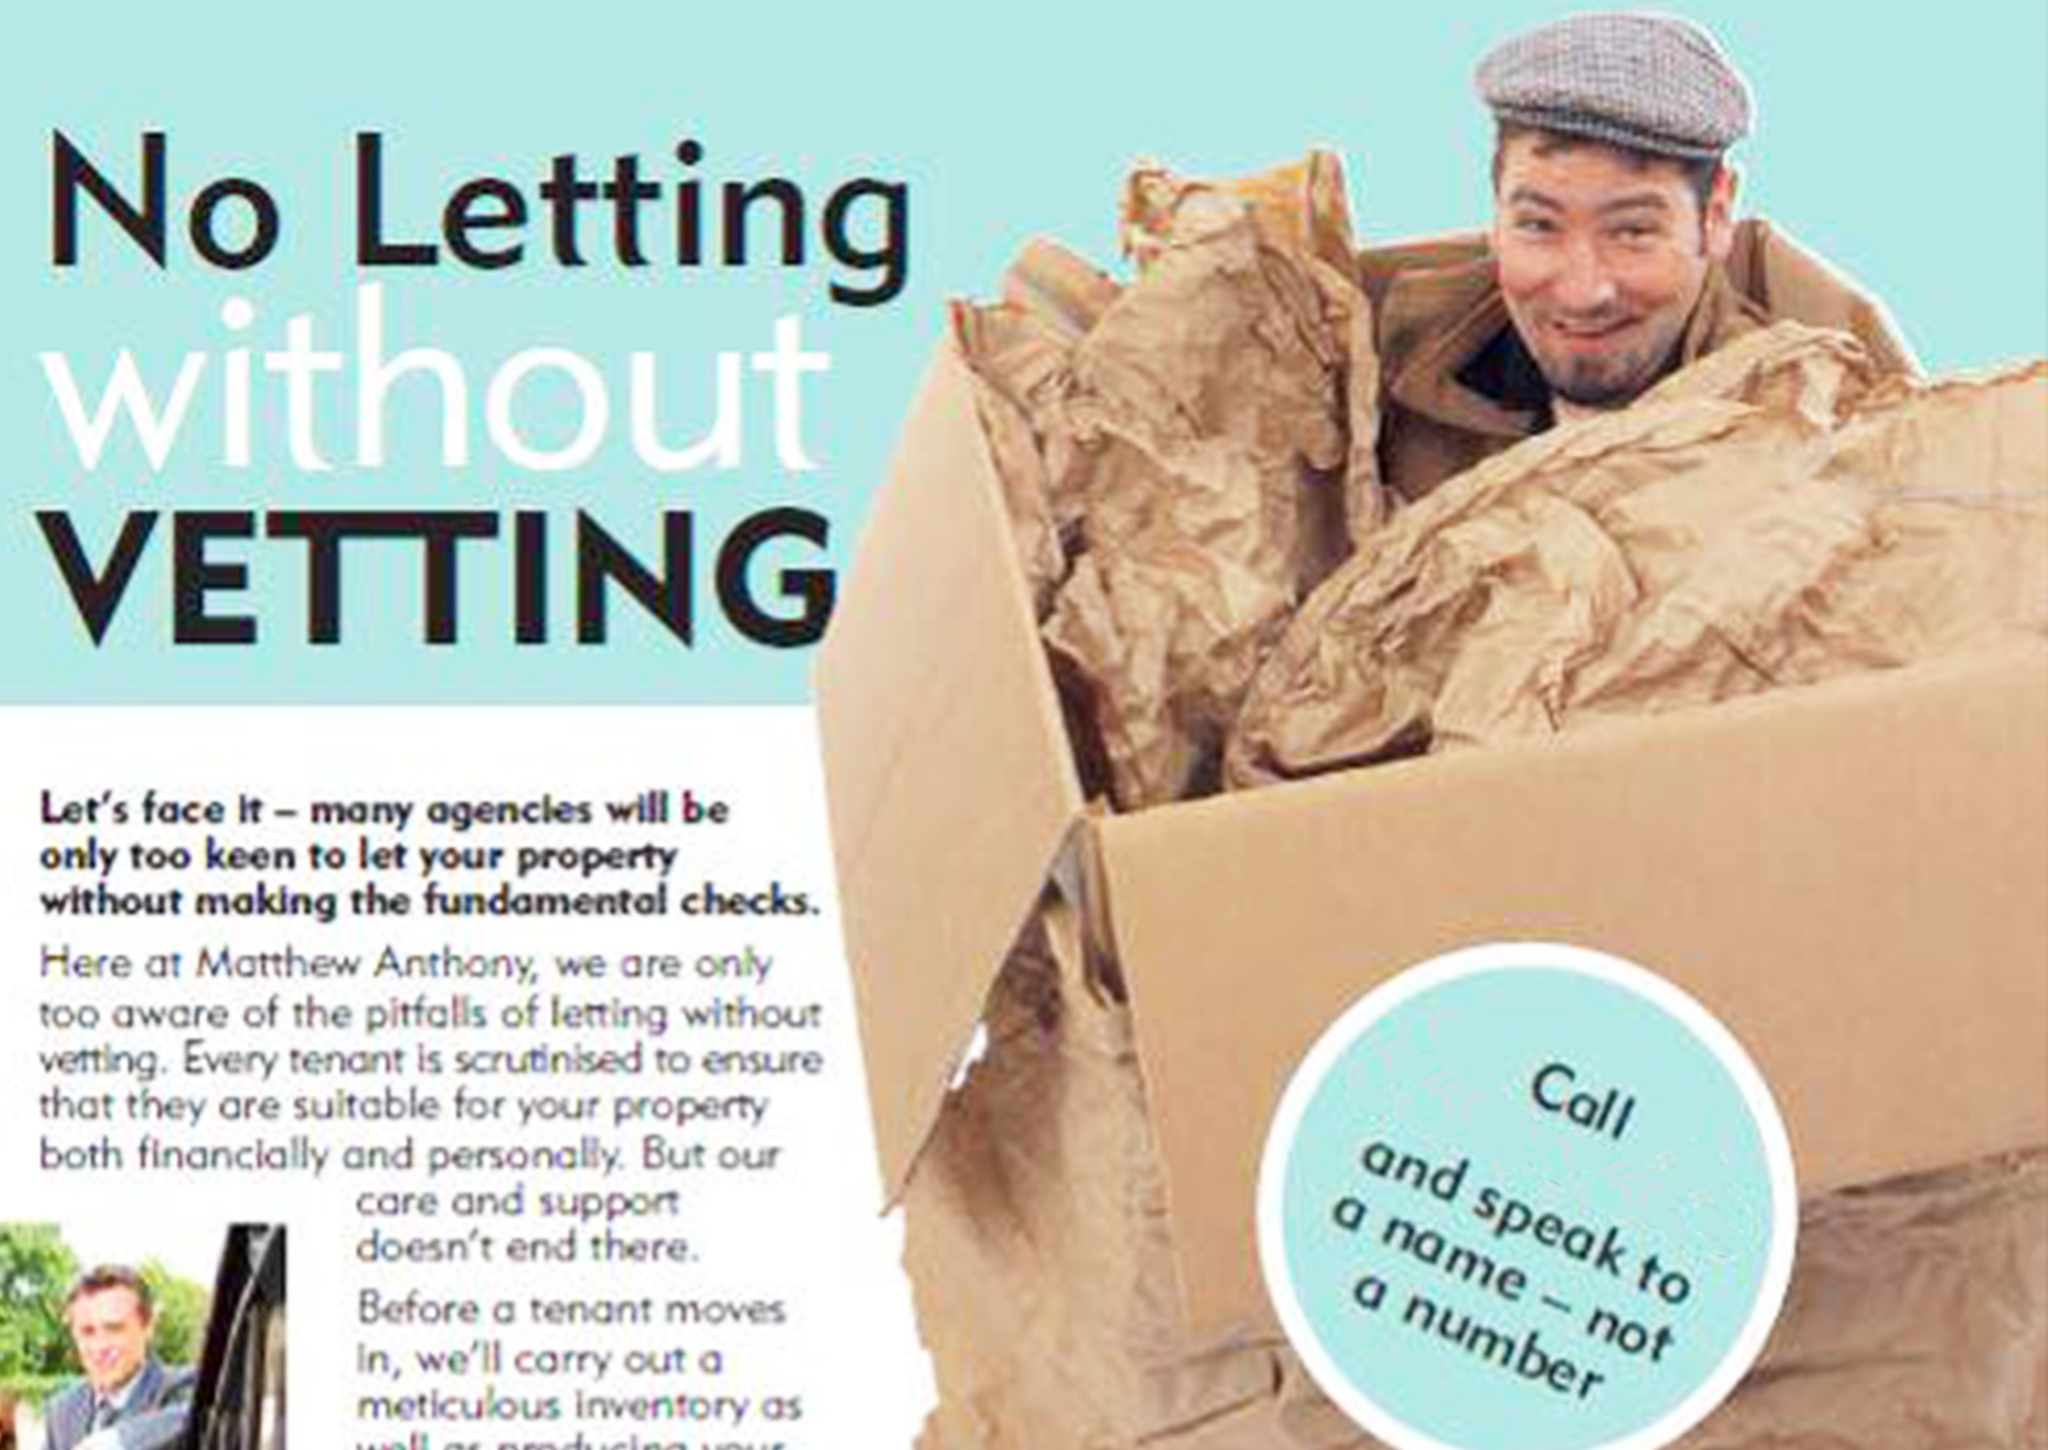 An advert for one letting agency that seems to mock homelessness